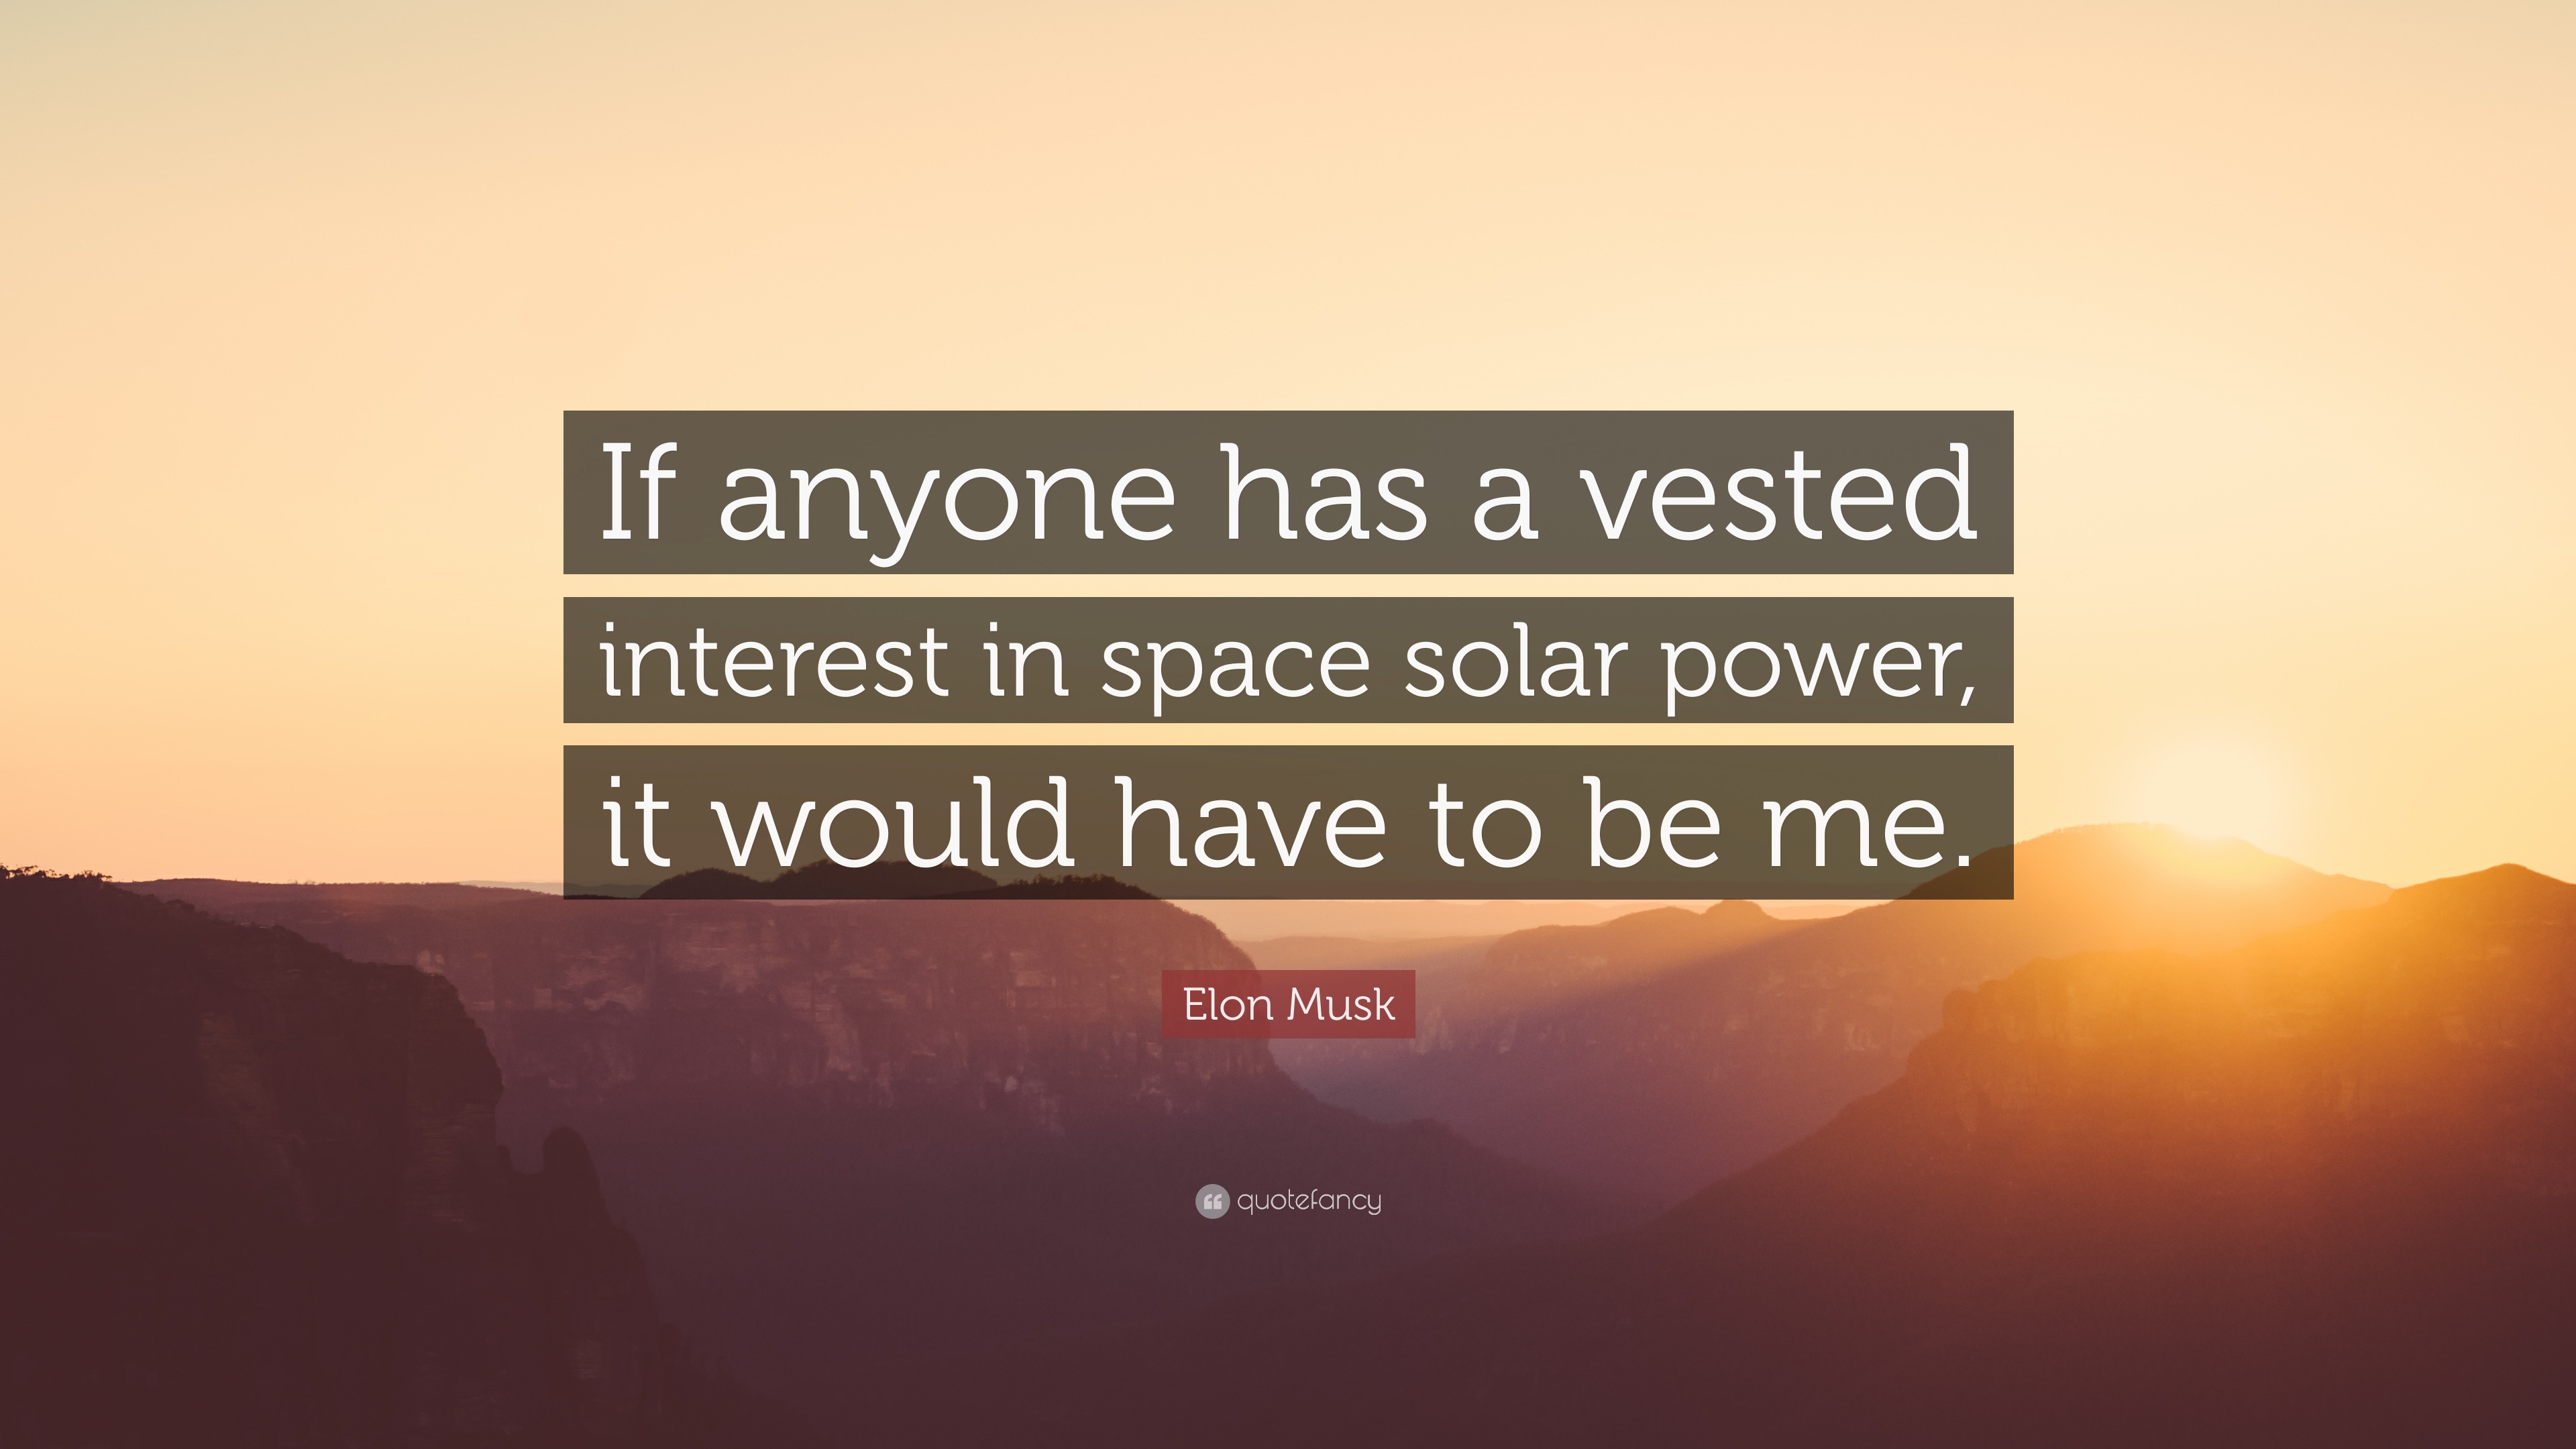 Elon Musk Quote: “If anyone has a vested interest in space solar power